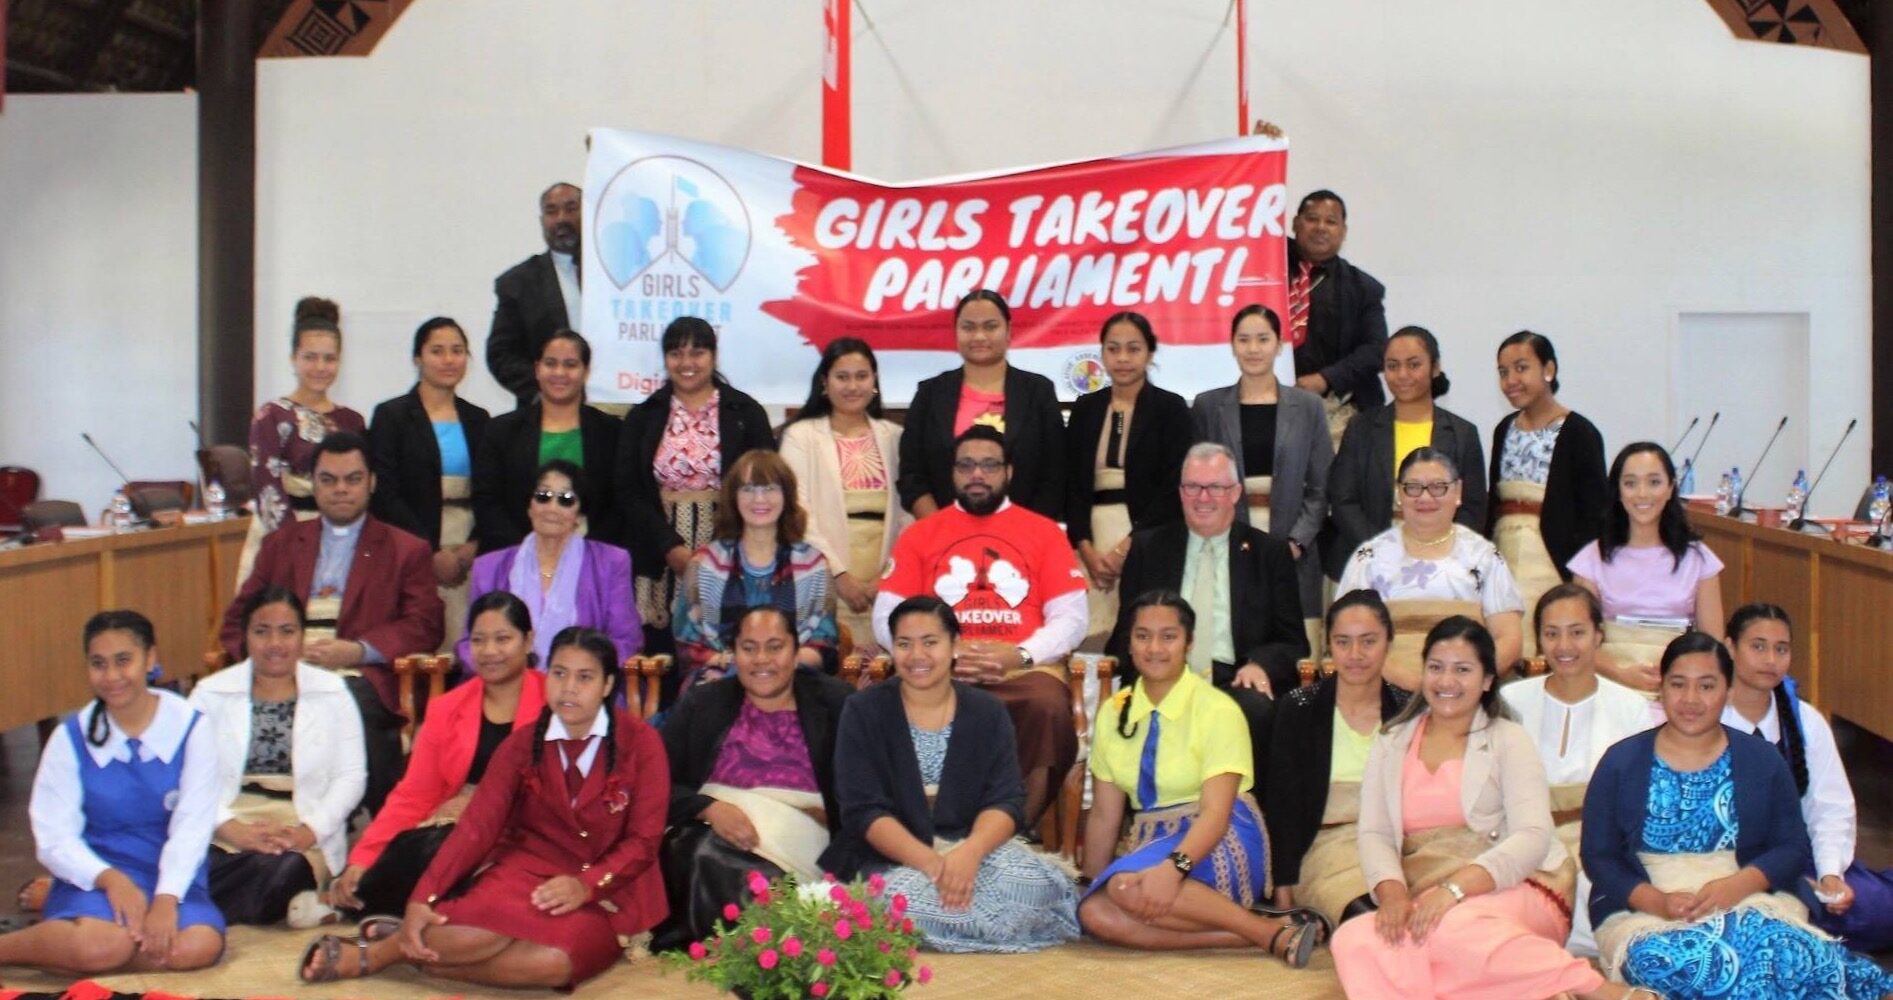 Tonga youth leaders – bringing small projects to life in Tonga